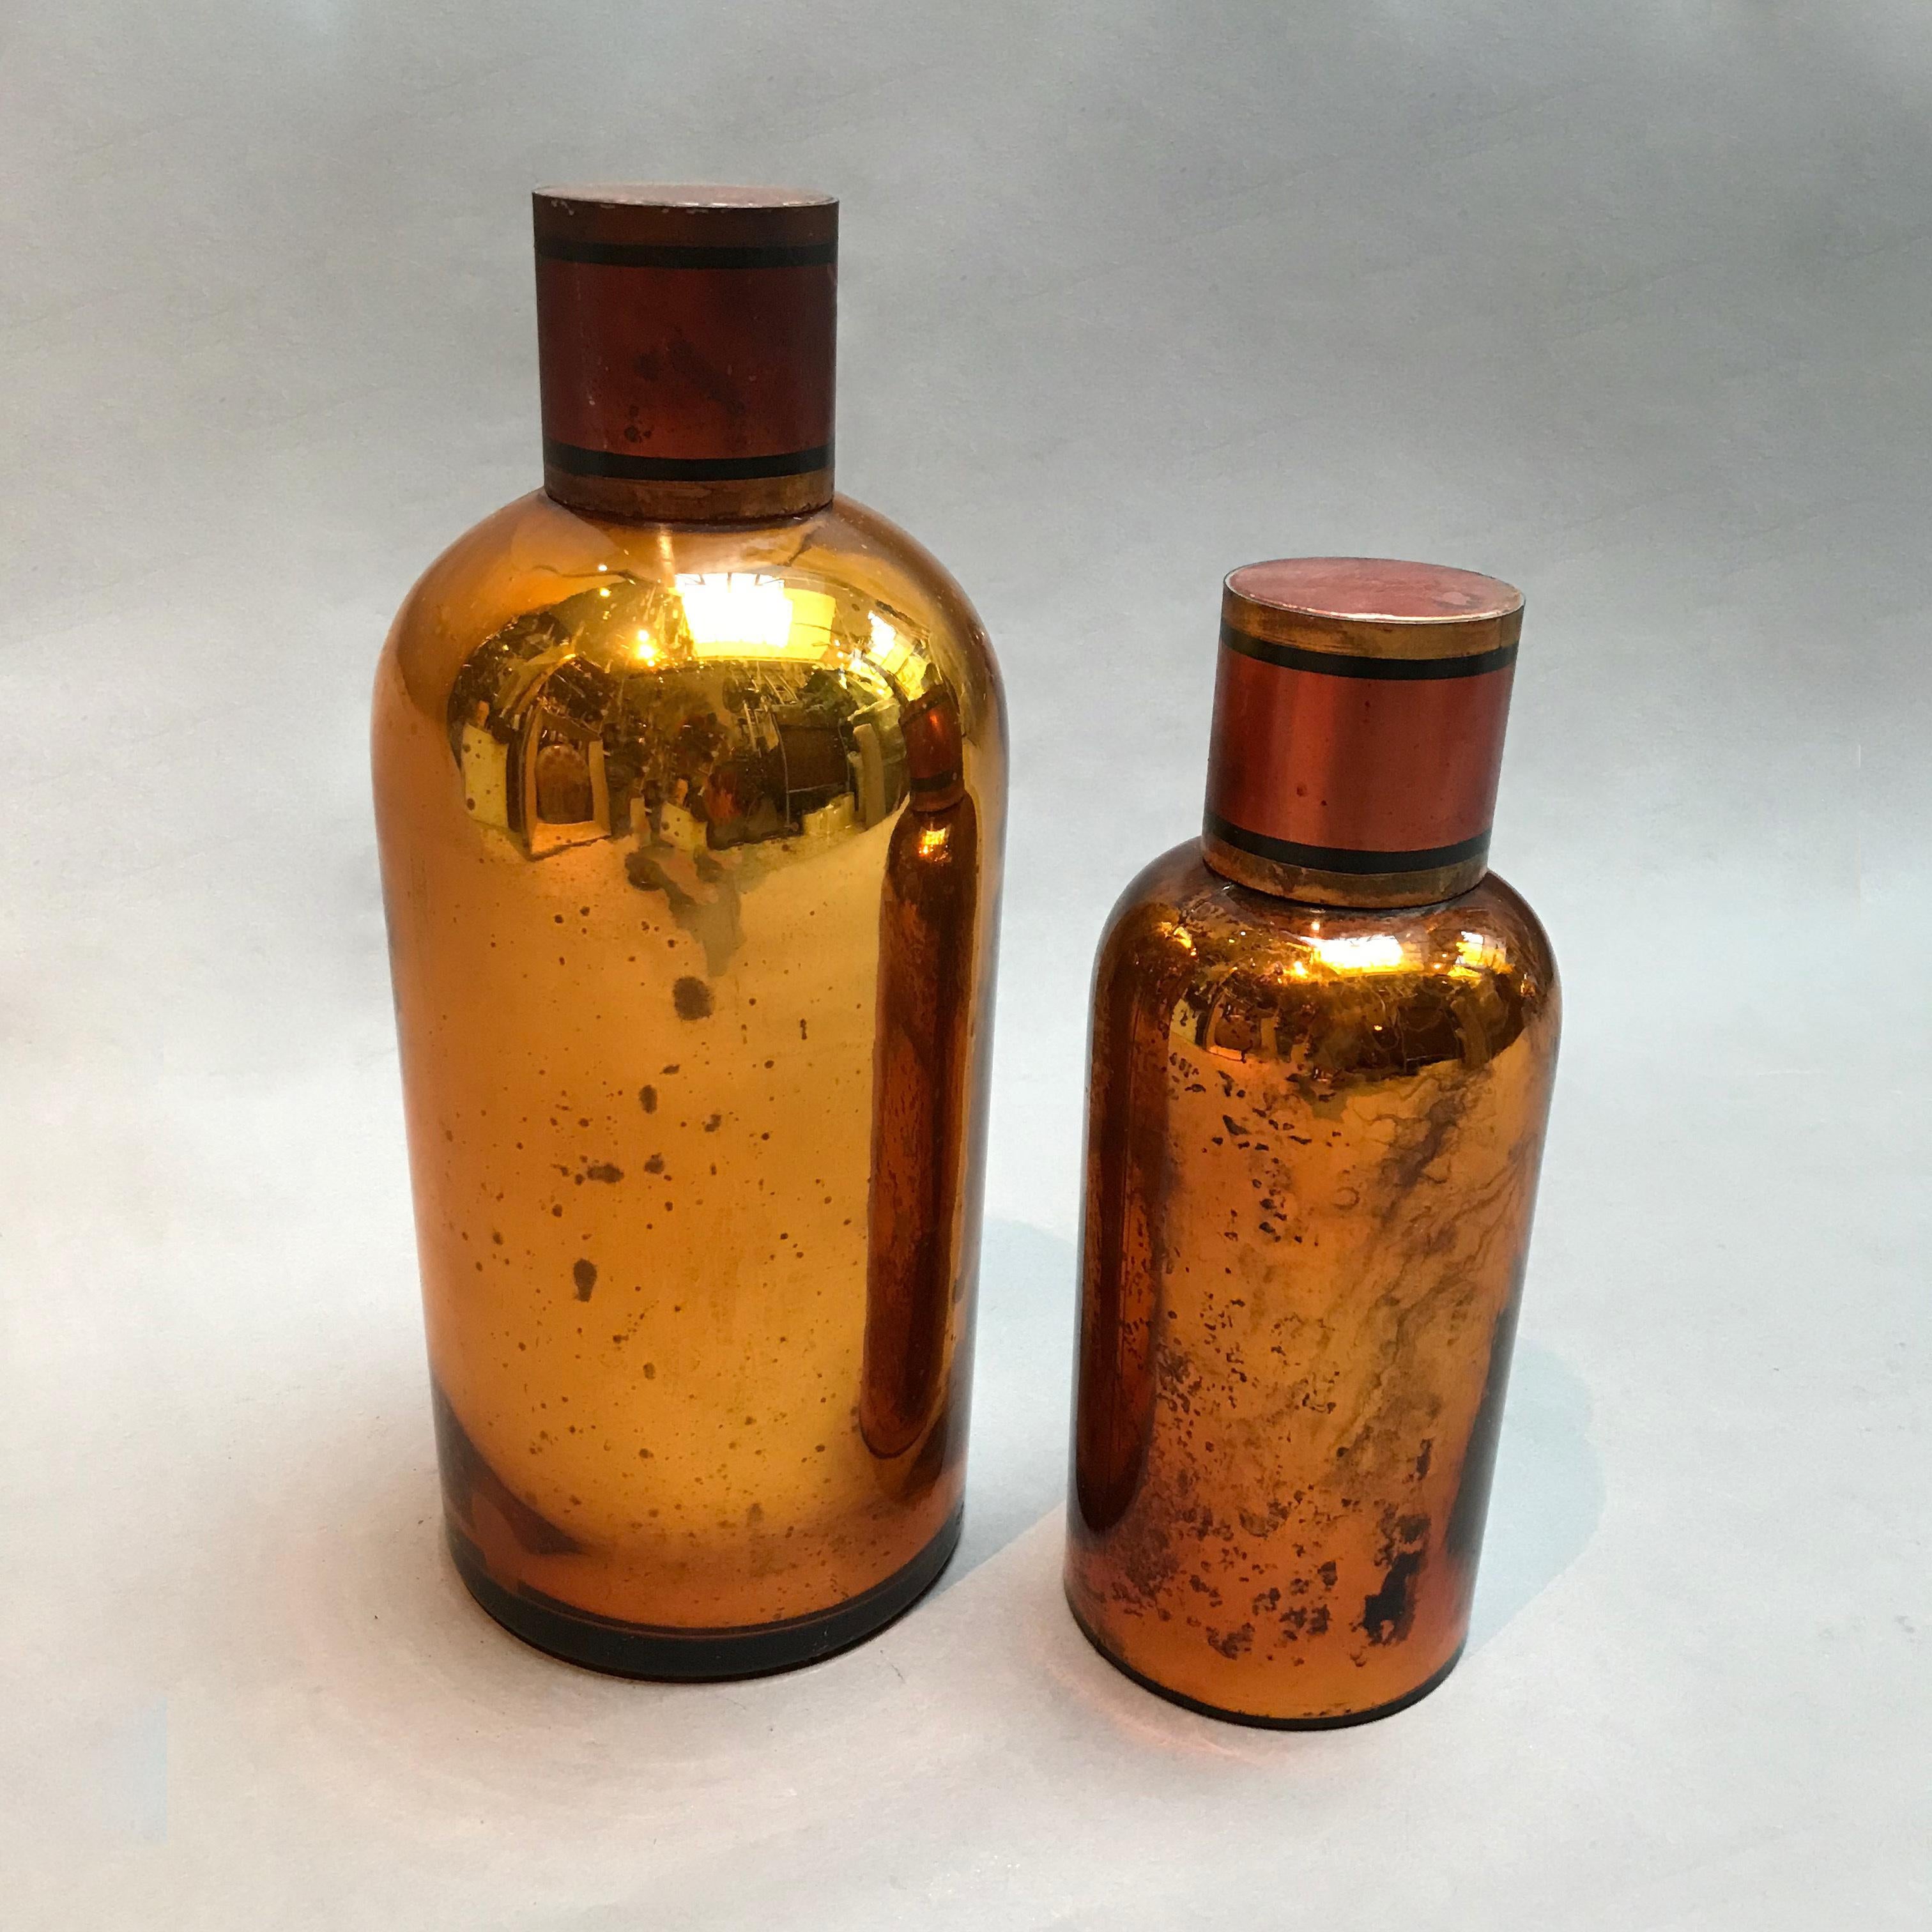 Pair of early 20th century, amber mercury glass, apothecary jars with tin lids.
Large jar measures 4.75 inches diameter x 12 inches height, small jar measures 3.5 inches diameter x 9.5 inches height.